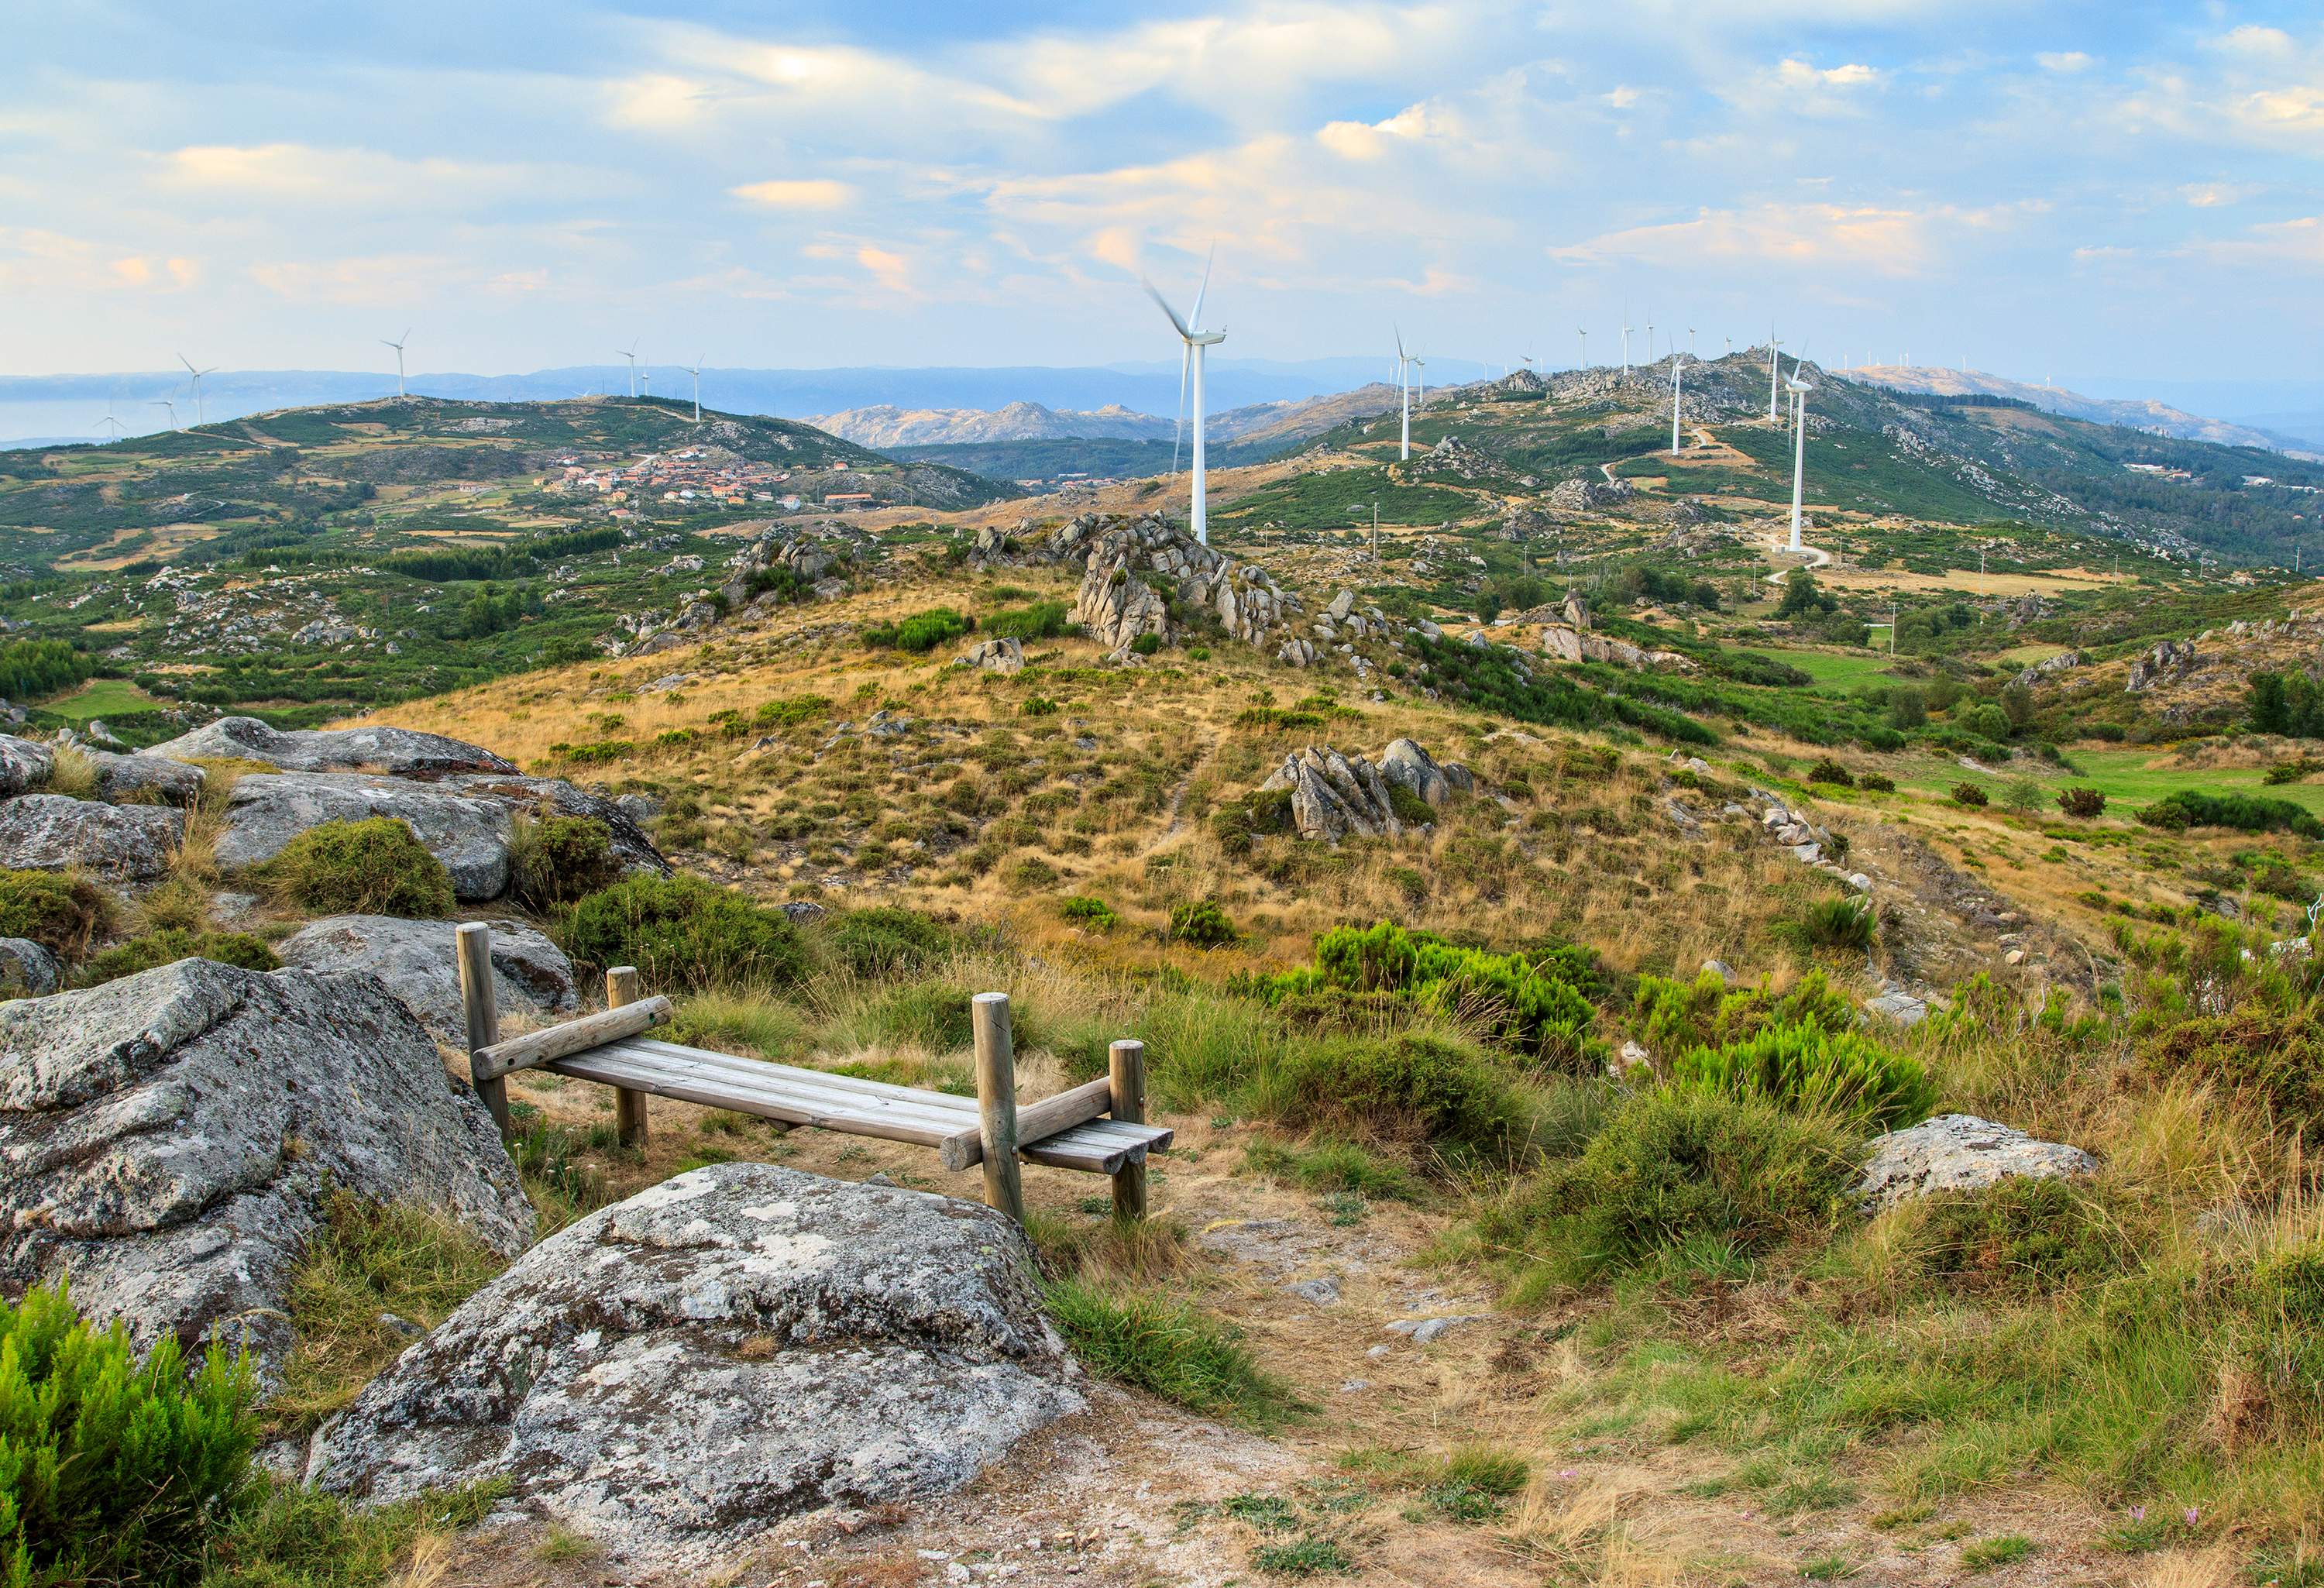 Viewing point of mountains with windmills